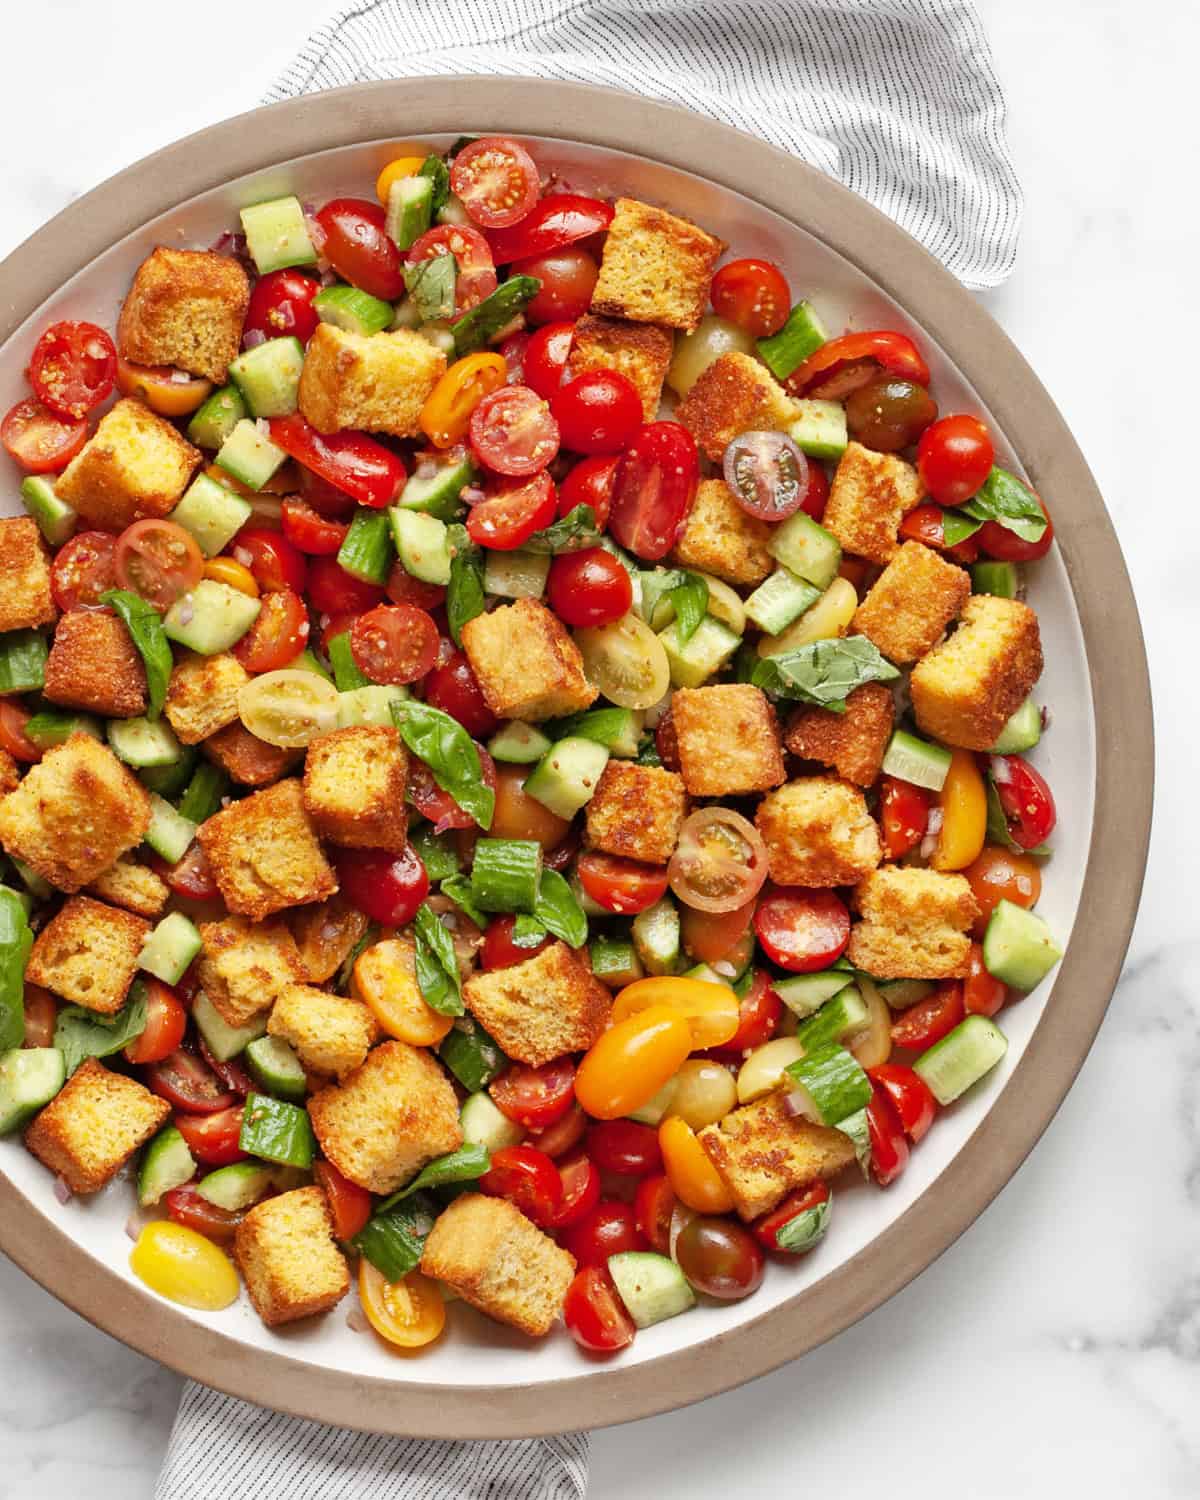 Panzanella salad with toasted cornbread on a large platter.